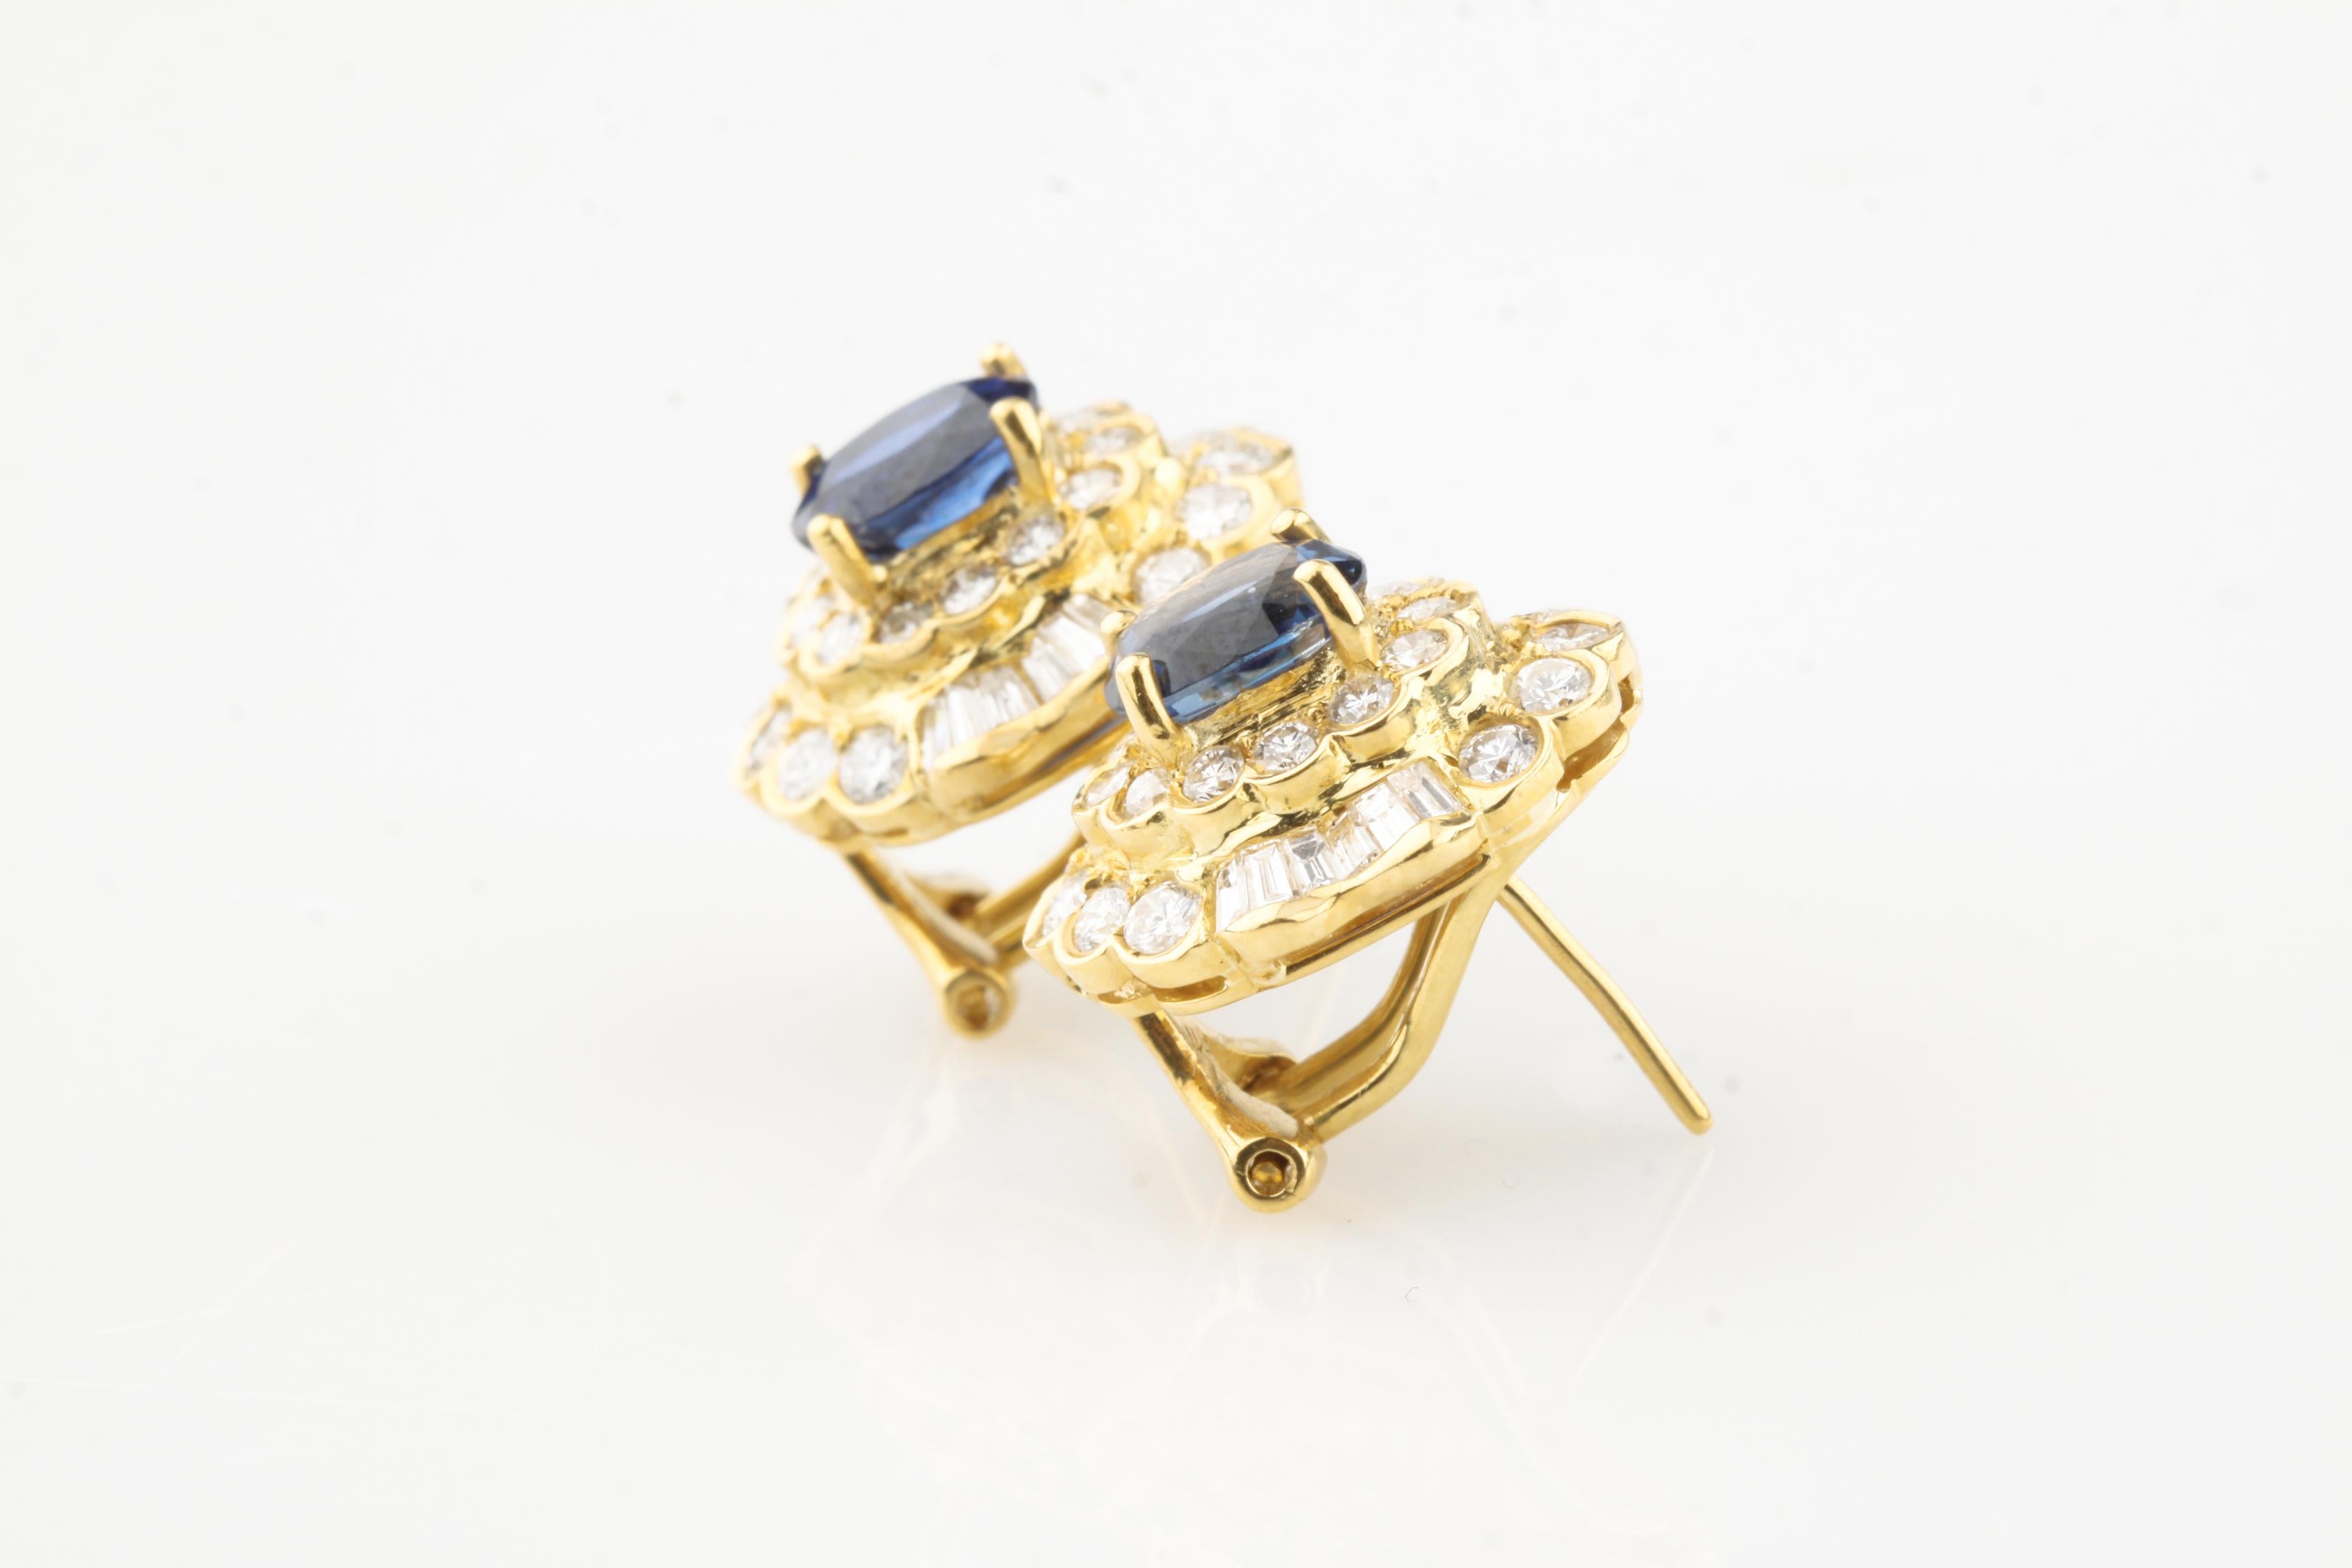 Beautiful Sapphire Huggie Earrings in 18k Yellow Gold
Feature Gorgeous Prong-Set Oval Sapphire Solitaires
Total Sapphire Weight = Appx 2 Cts
Surrounded by Double-Bezel of Bezel-Set Round and Channel Baguette Diamonds
Semi-Ballerina Setting
Total